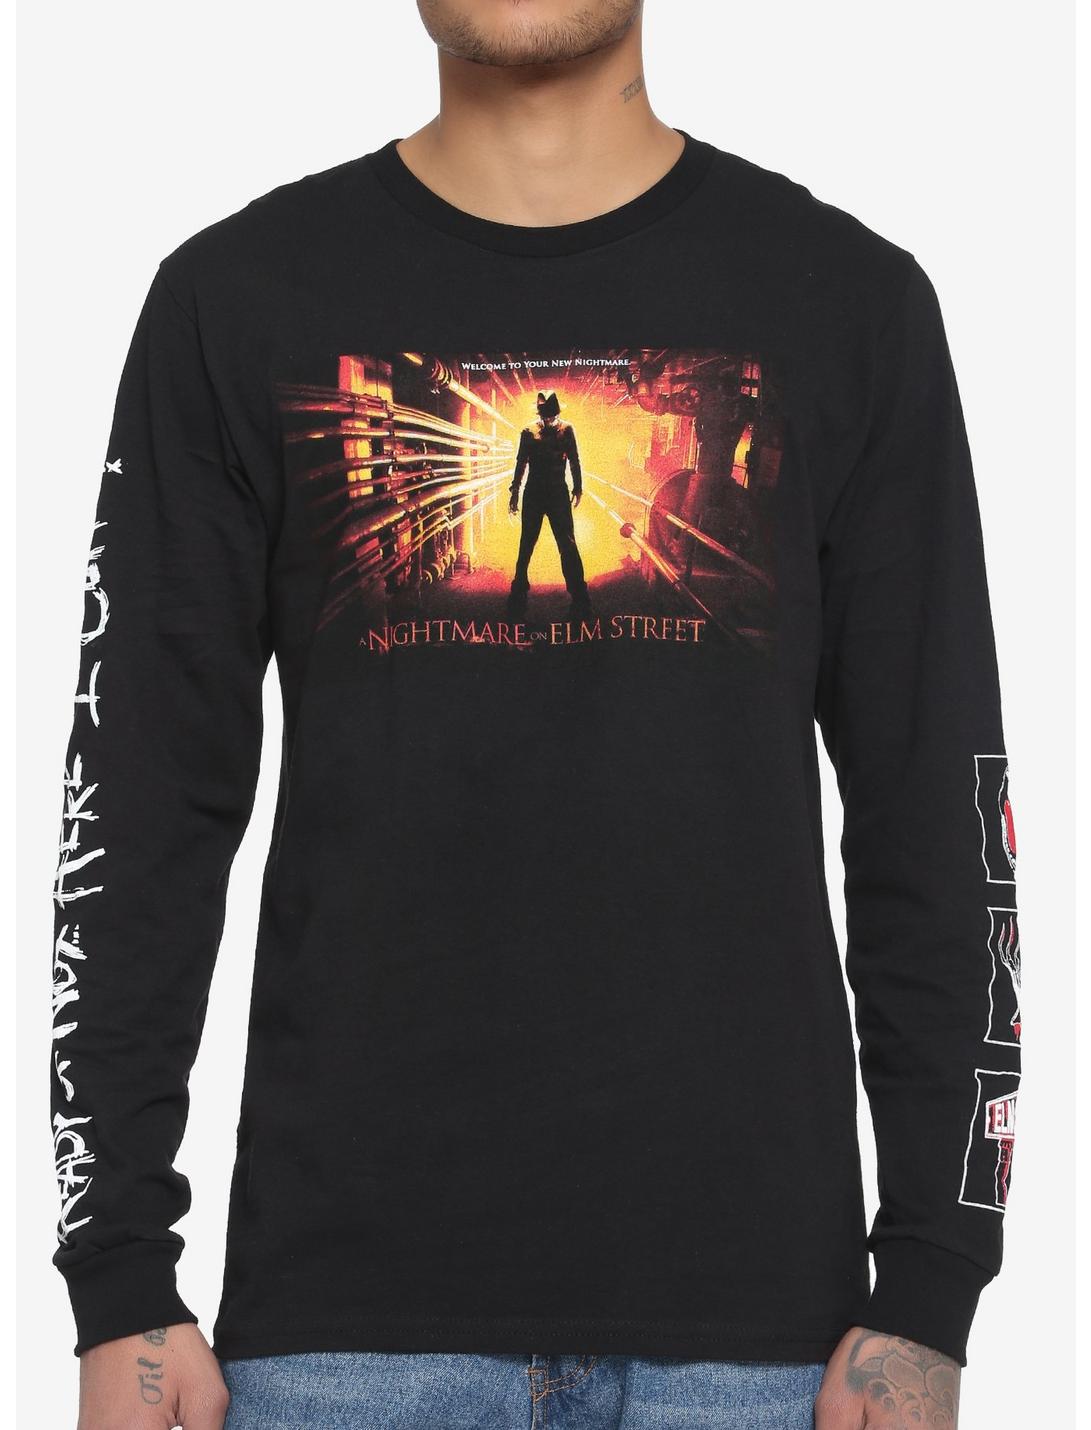 A Nightmare On Elm Street Here I Come Long-Sleeve T-Shirt, BLACK, hi-res